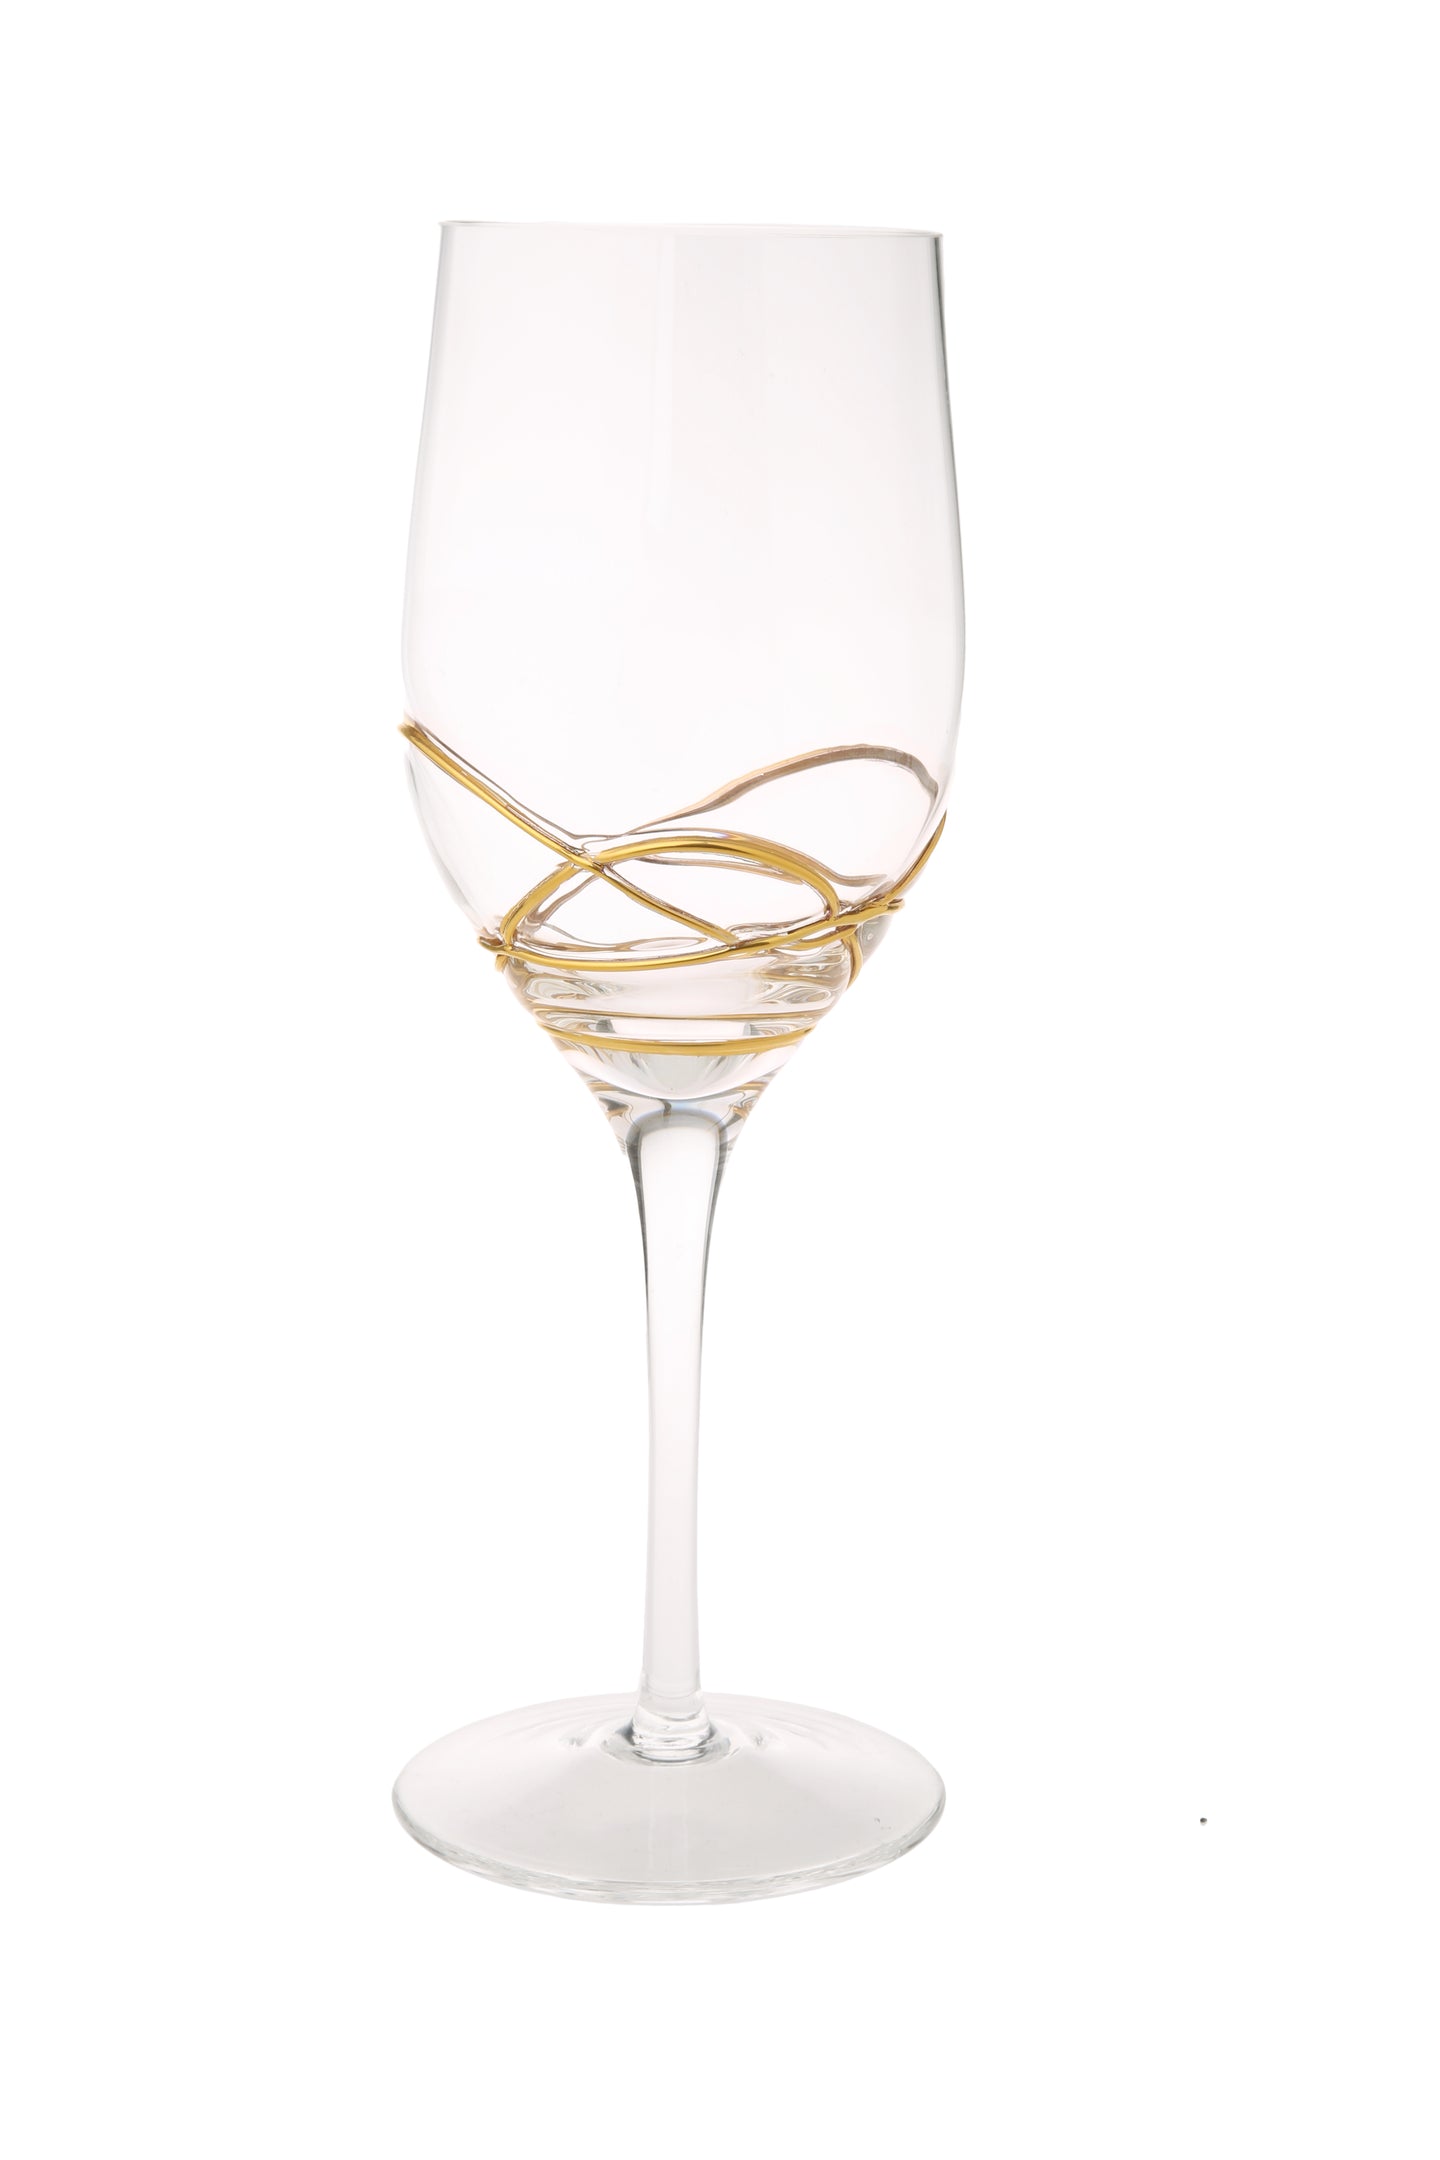 Set of 6 Wine Glasses with 14K Gold Swirl Gold Design